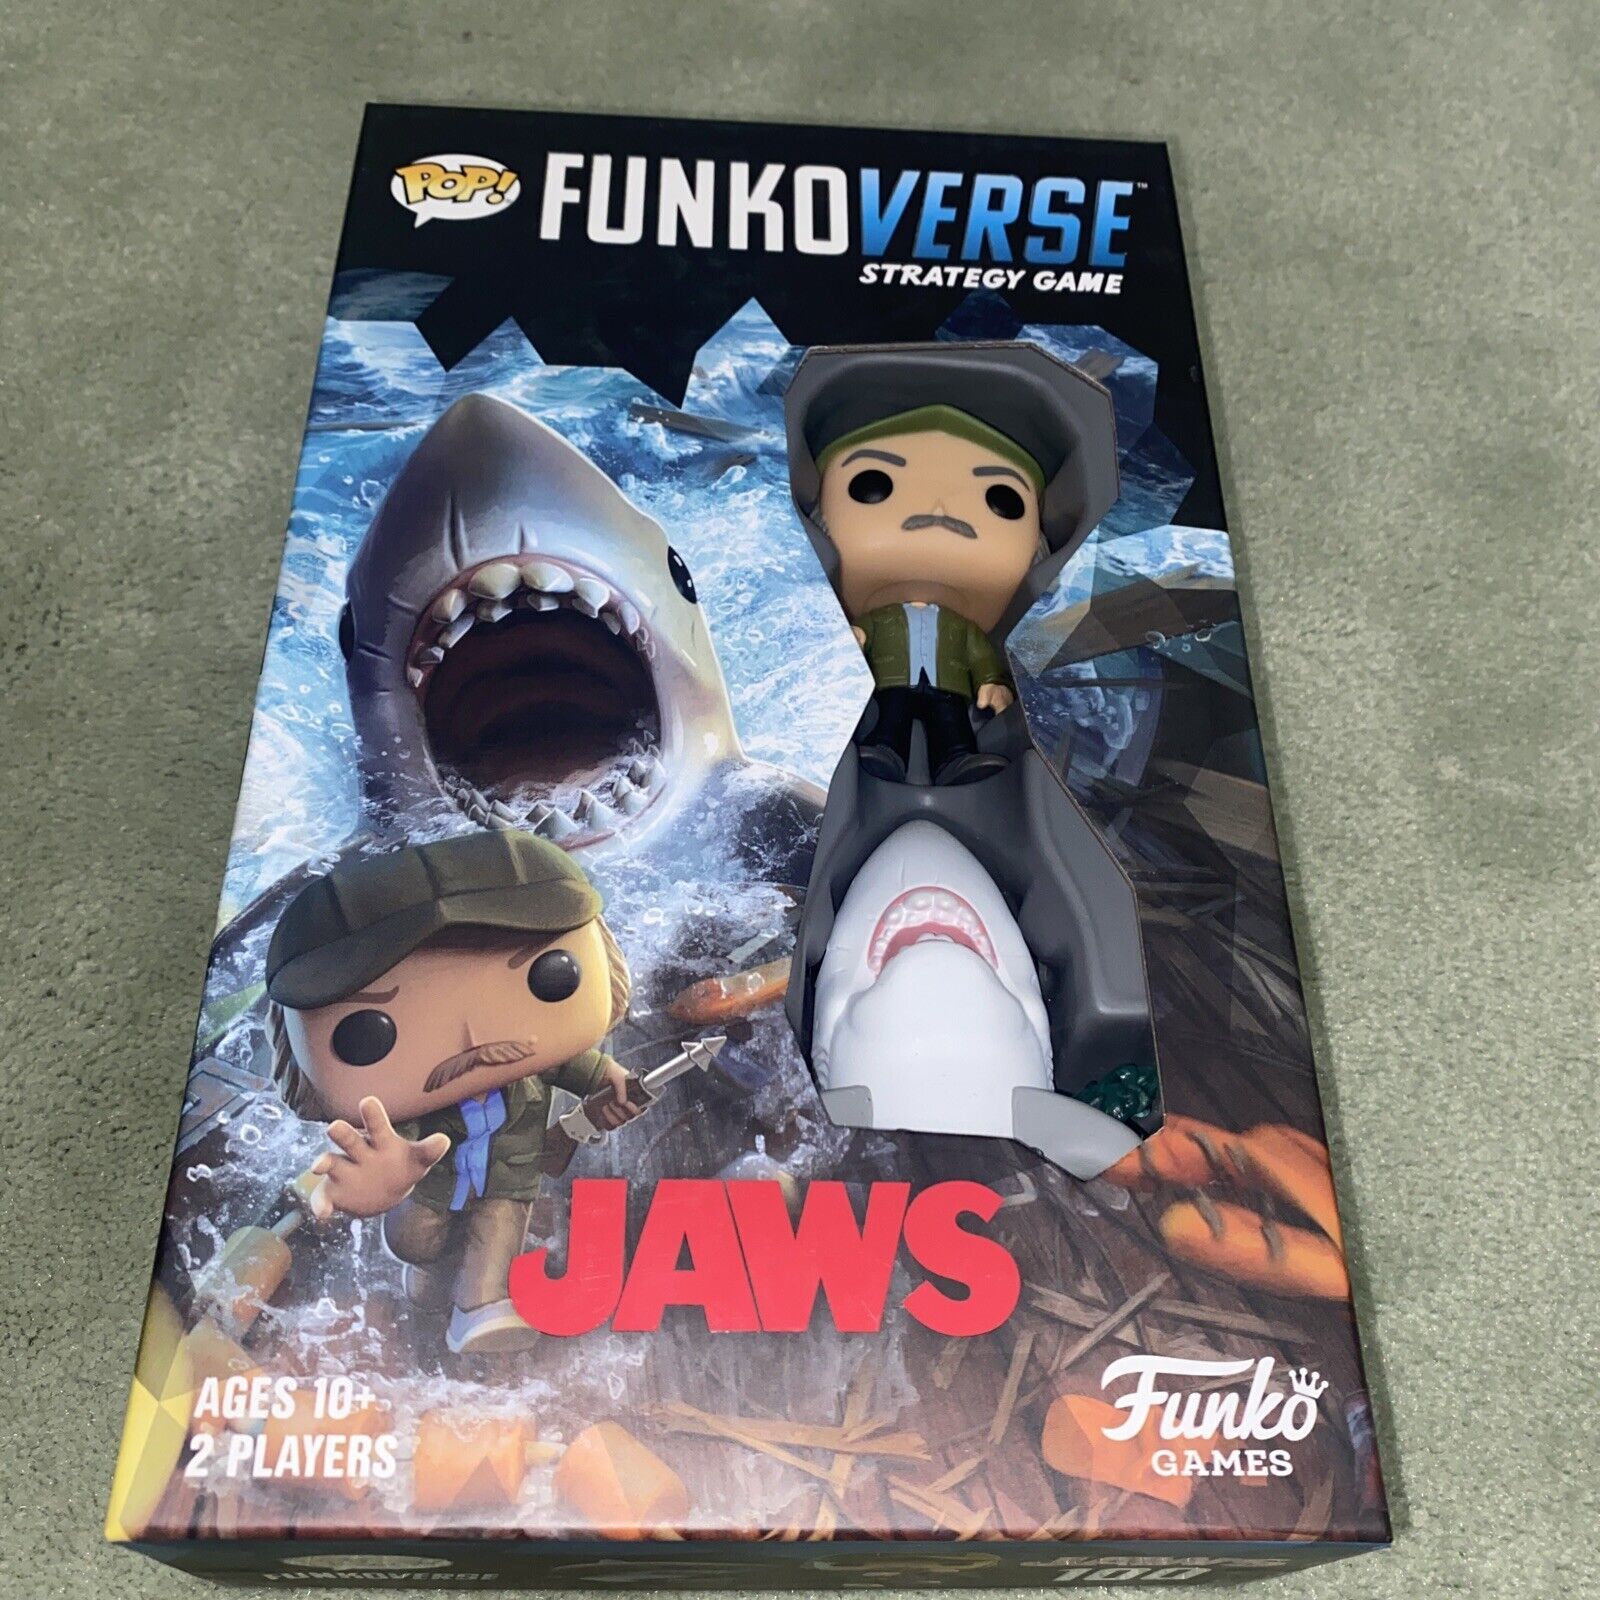 Primary image for Funkoverse: Jaws 100 2-Pack Strategy Board Game, Expandalone NEW Funko Games Pop